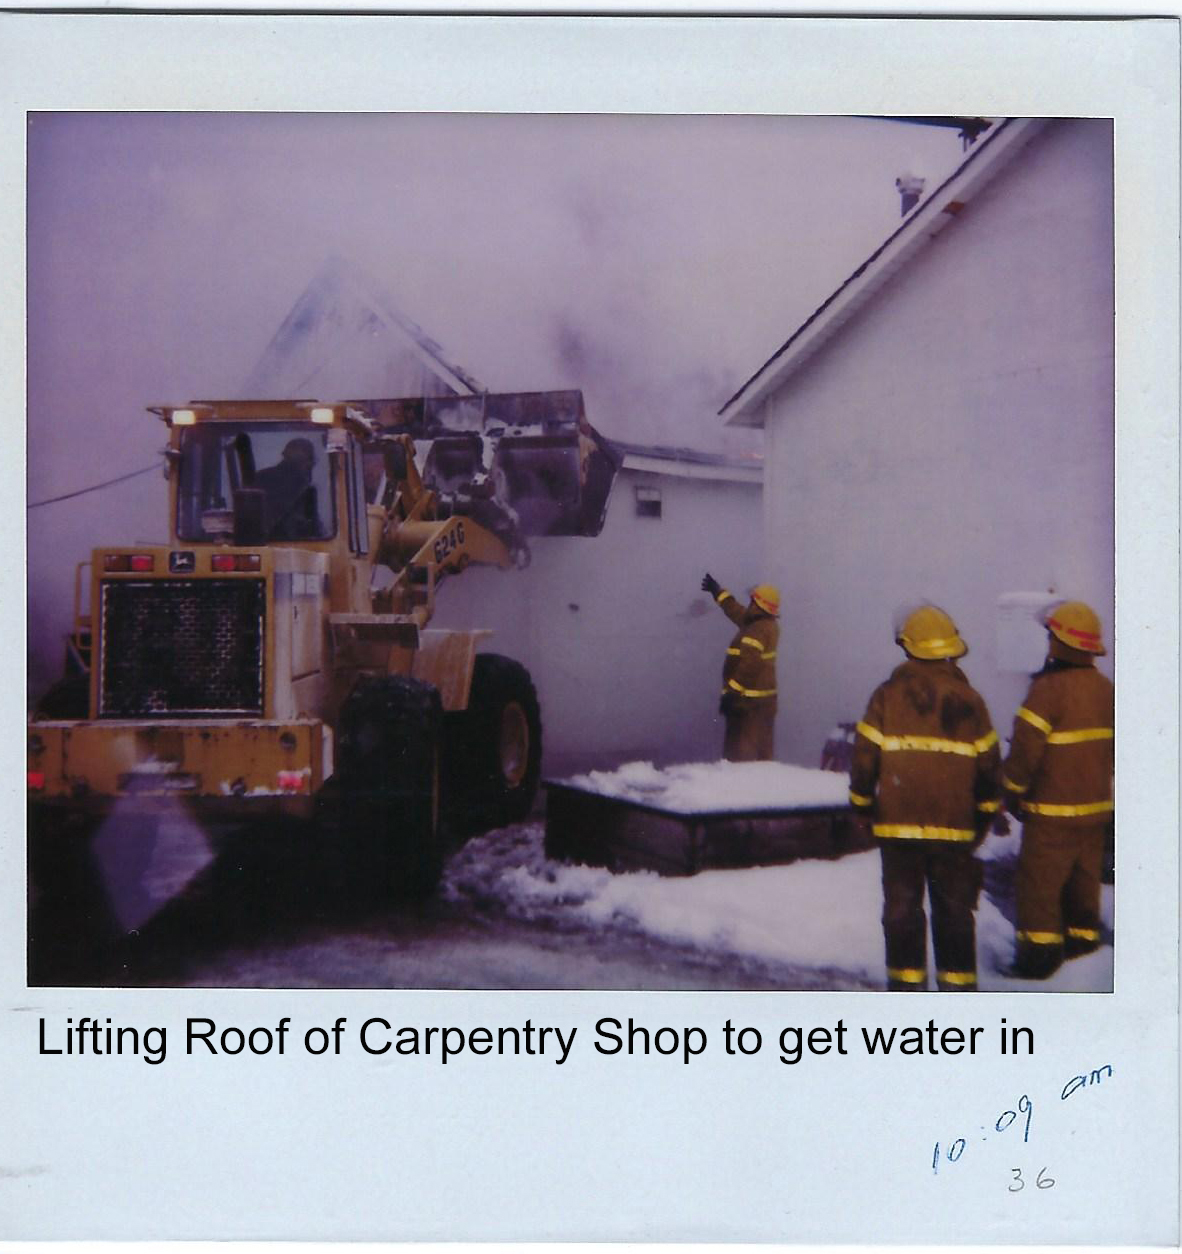 Lifting roof to get water in